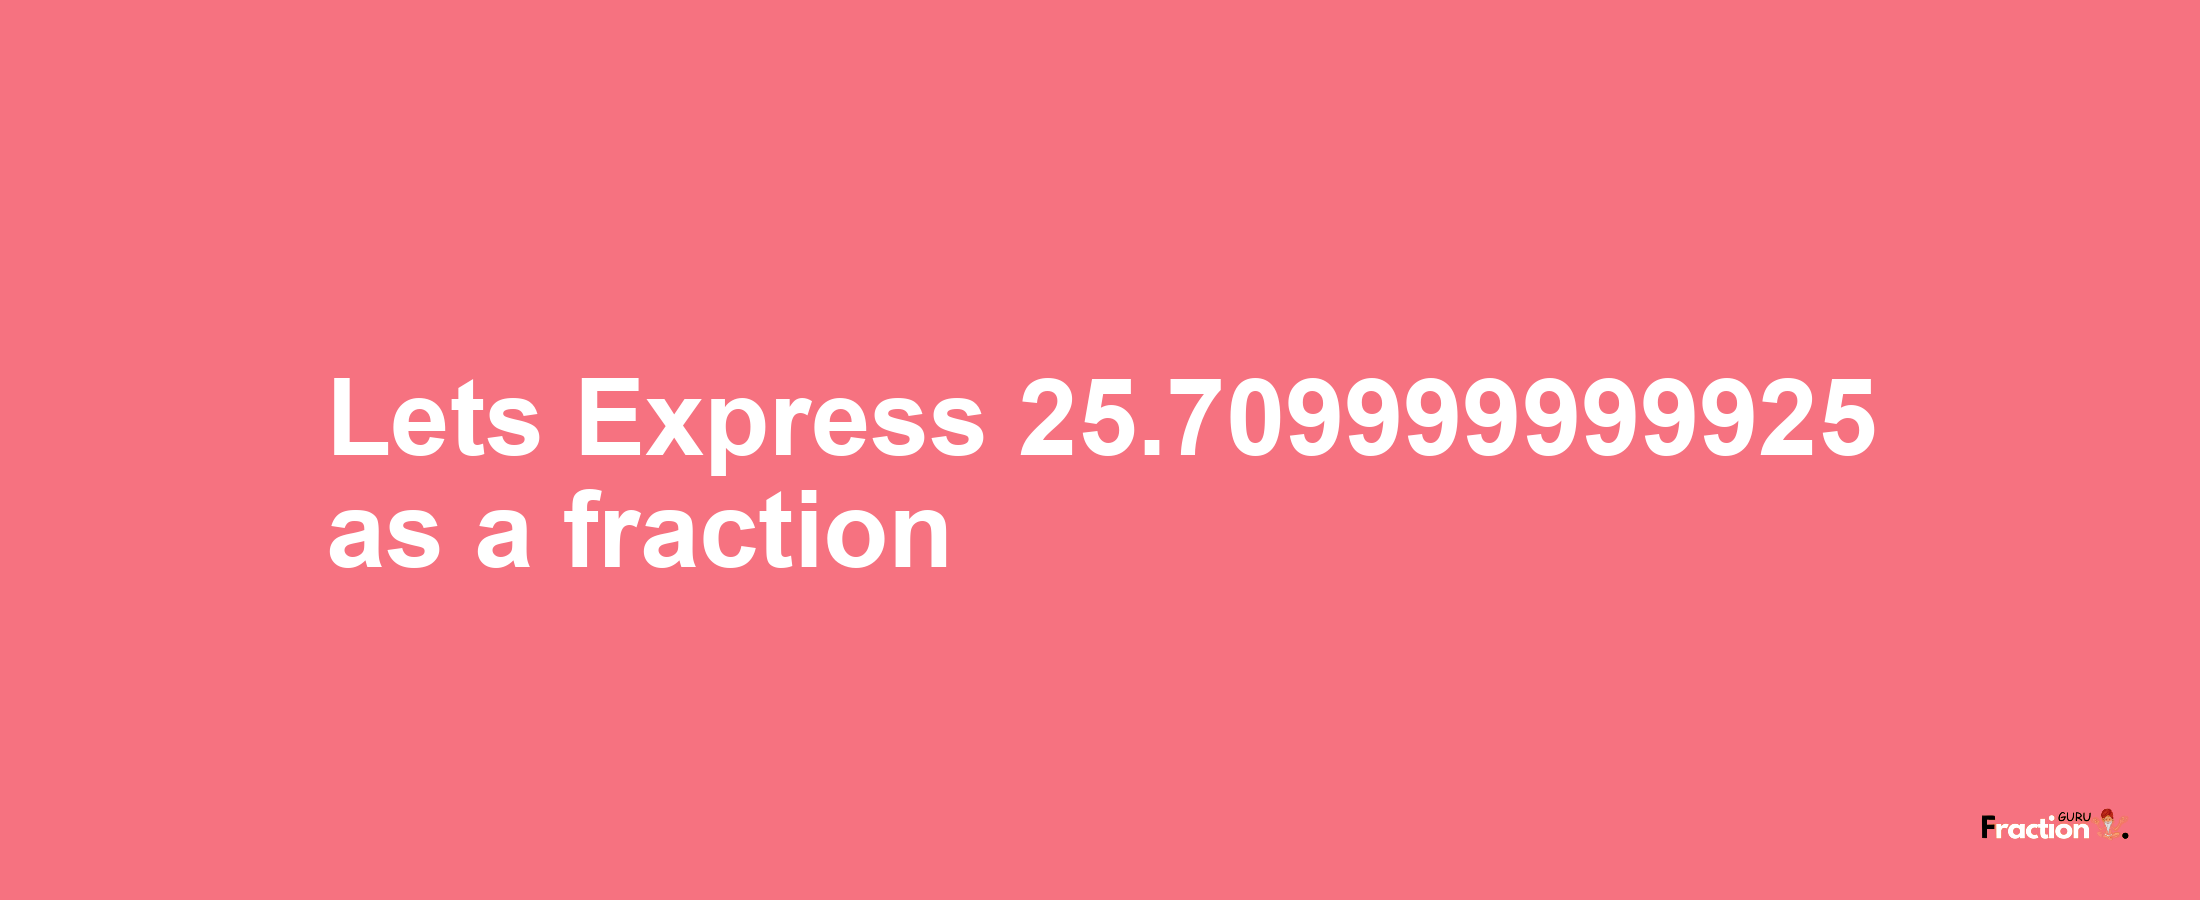 Lets Express 25.709999999925 as afraction